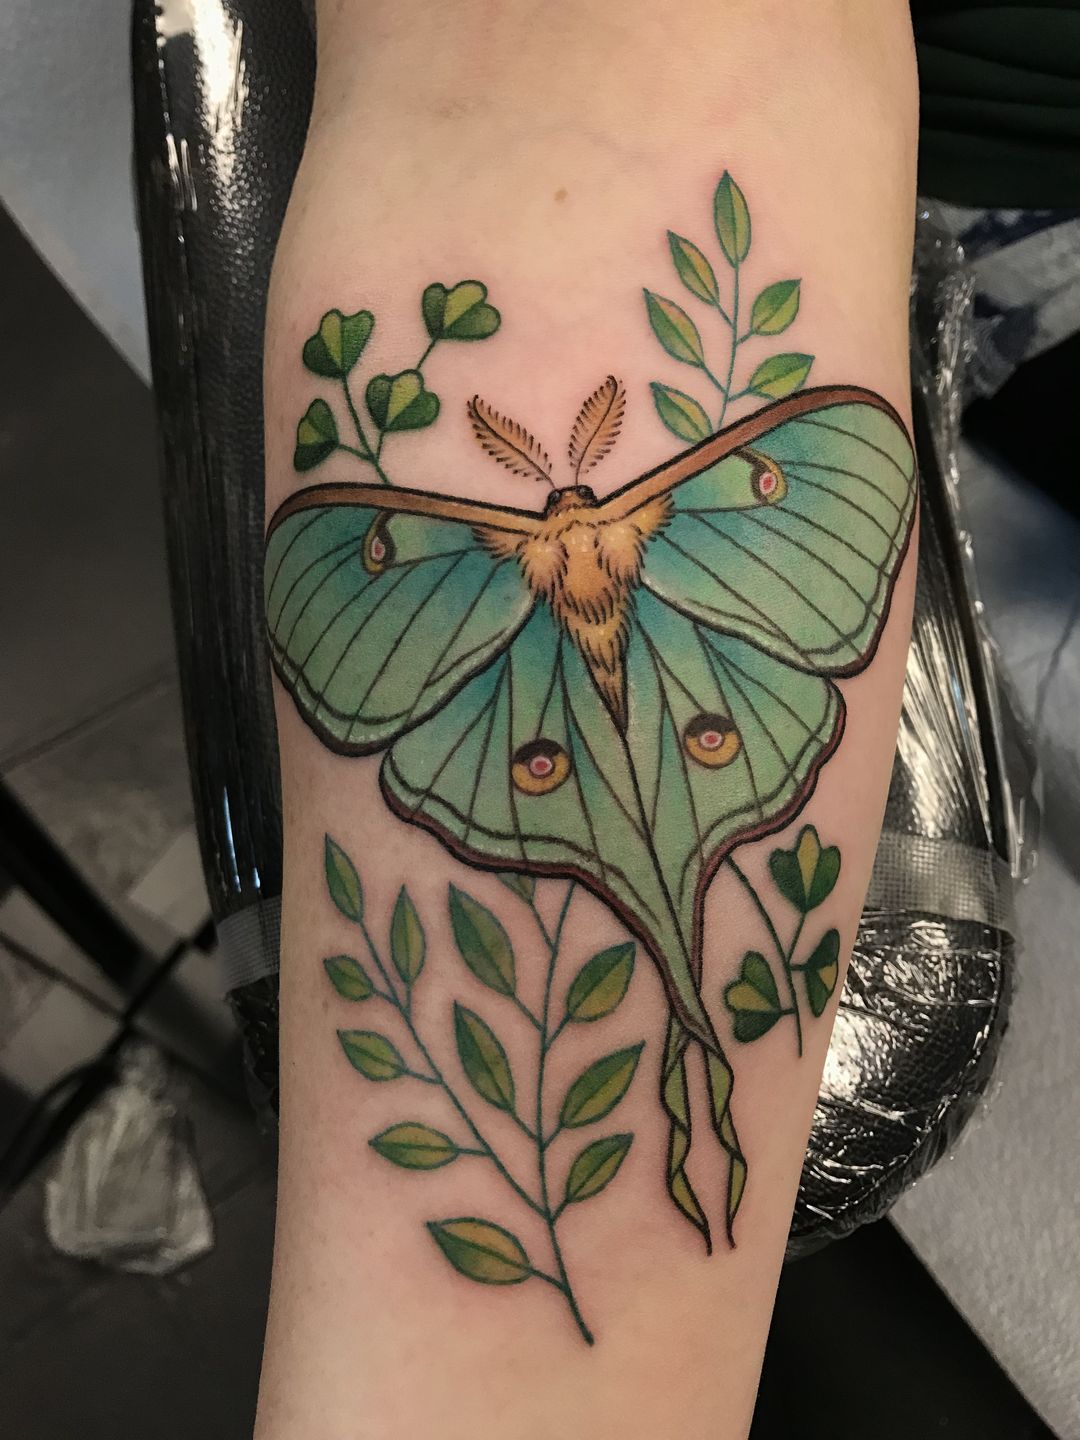 560+ Amazing Moth Tattoos Designs With Meaning and Symbolism Jobs Holders